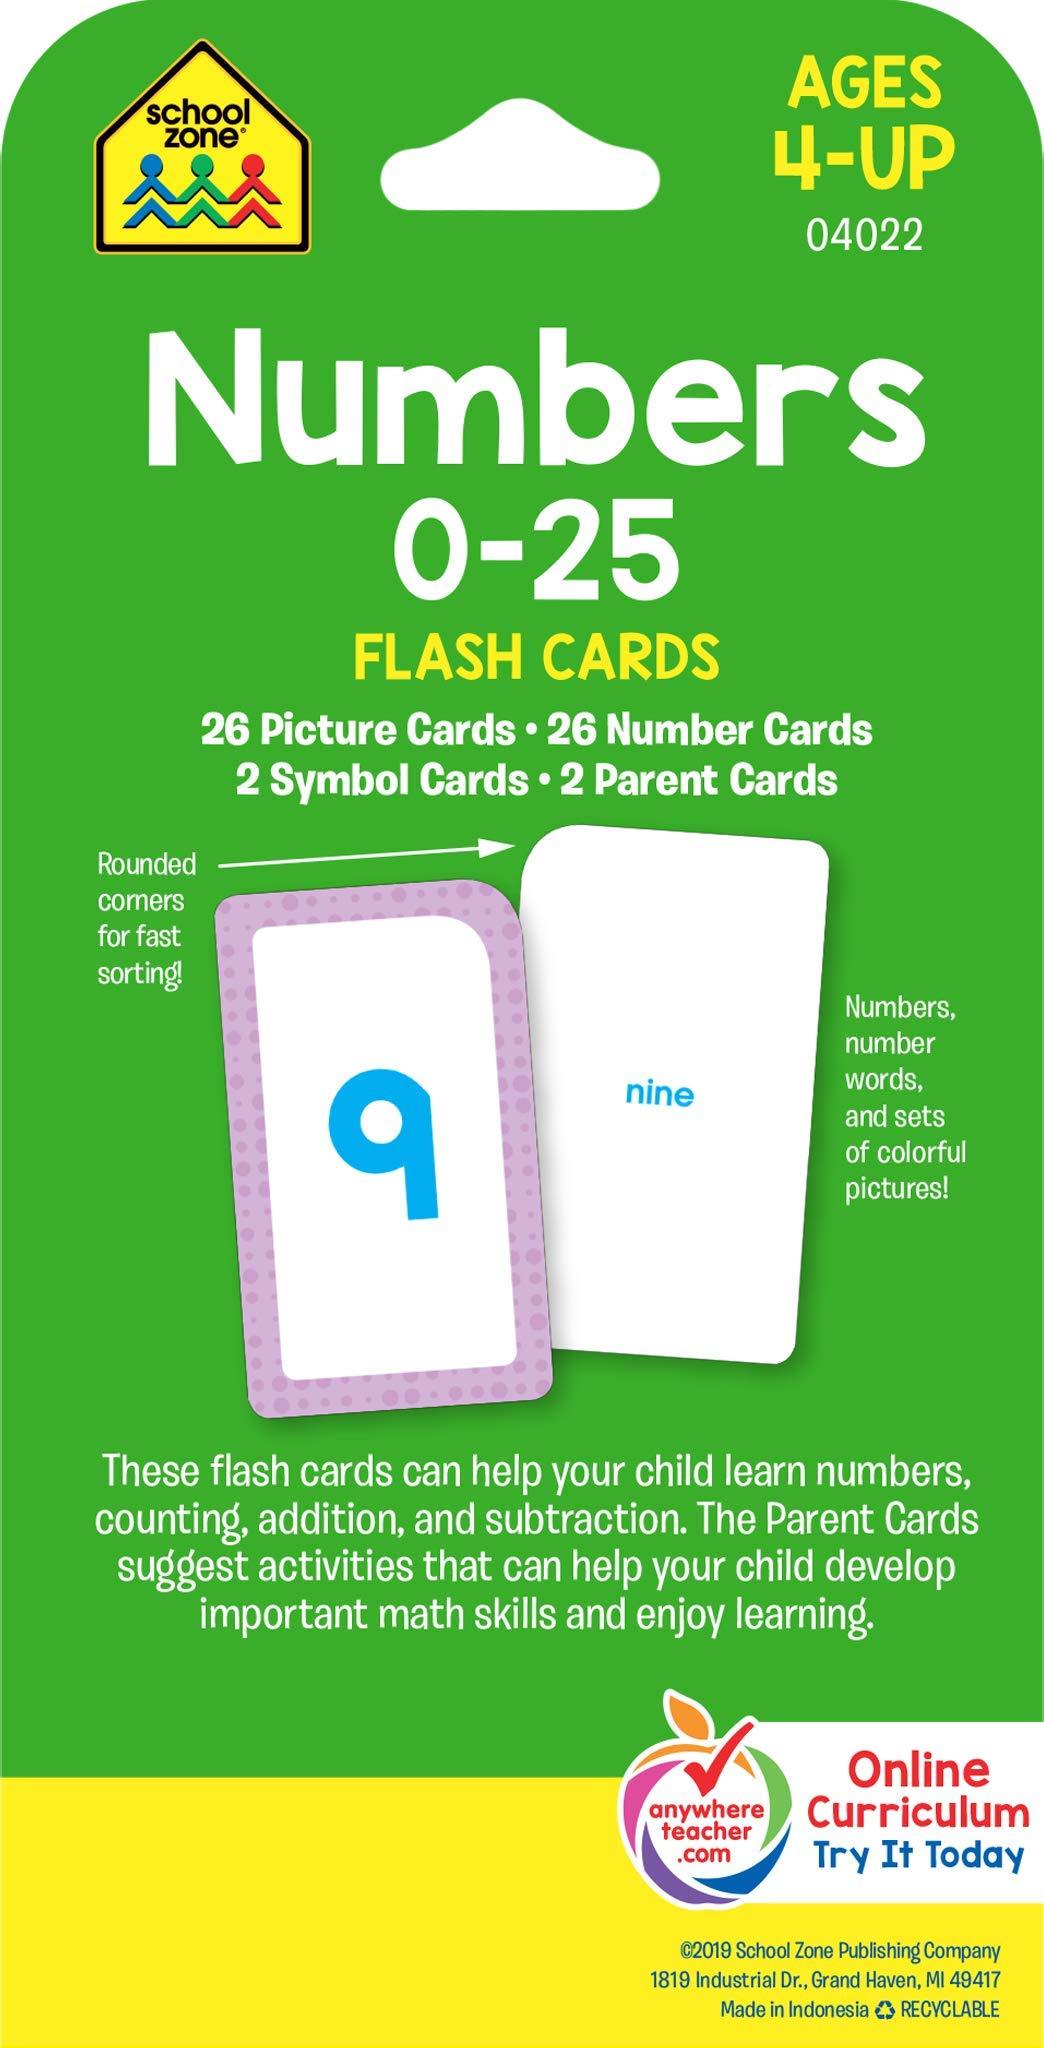 Numbers 0-25 Flash Cards - Ages 4 to 6, Preschool, Kindergarten, Math, Addition, Subtraction, Numerical Order, Counting, and More